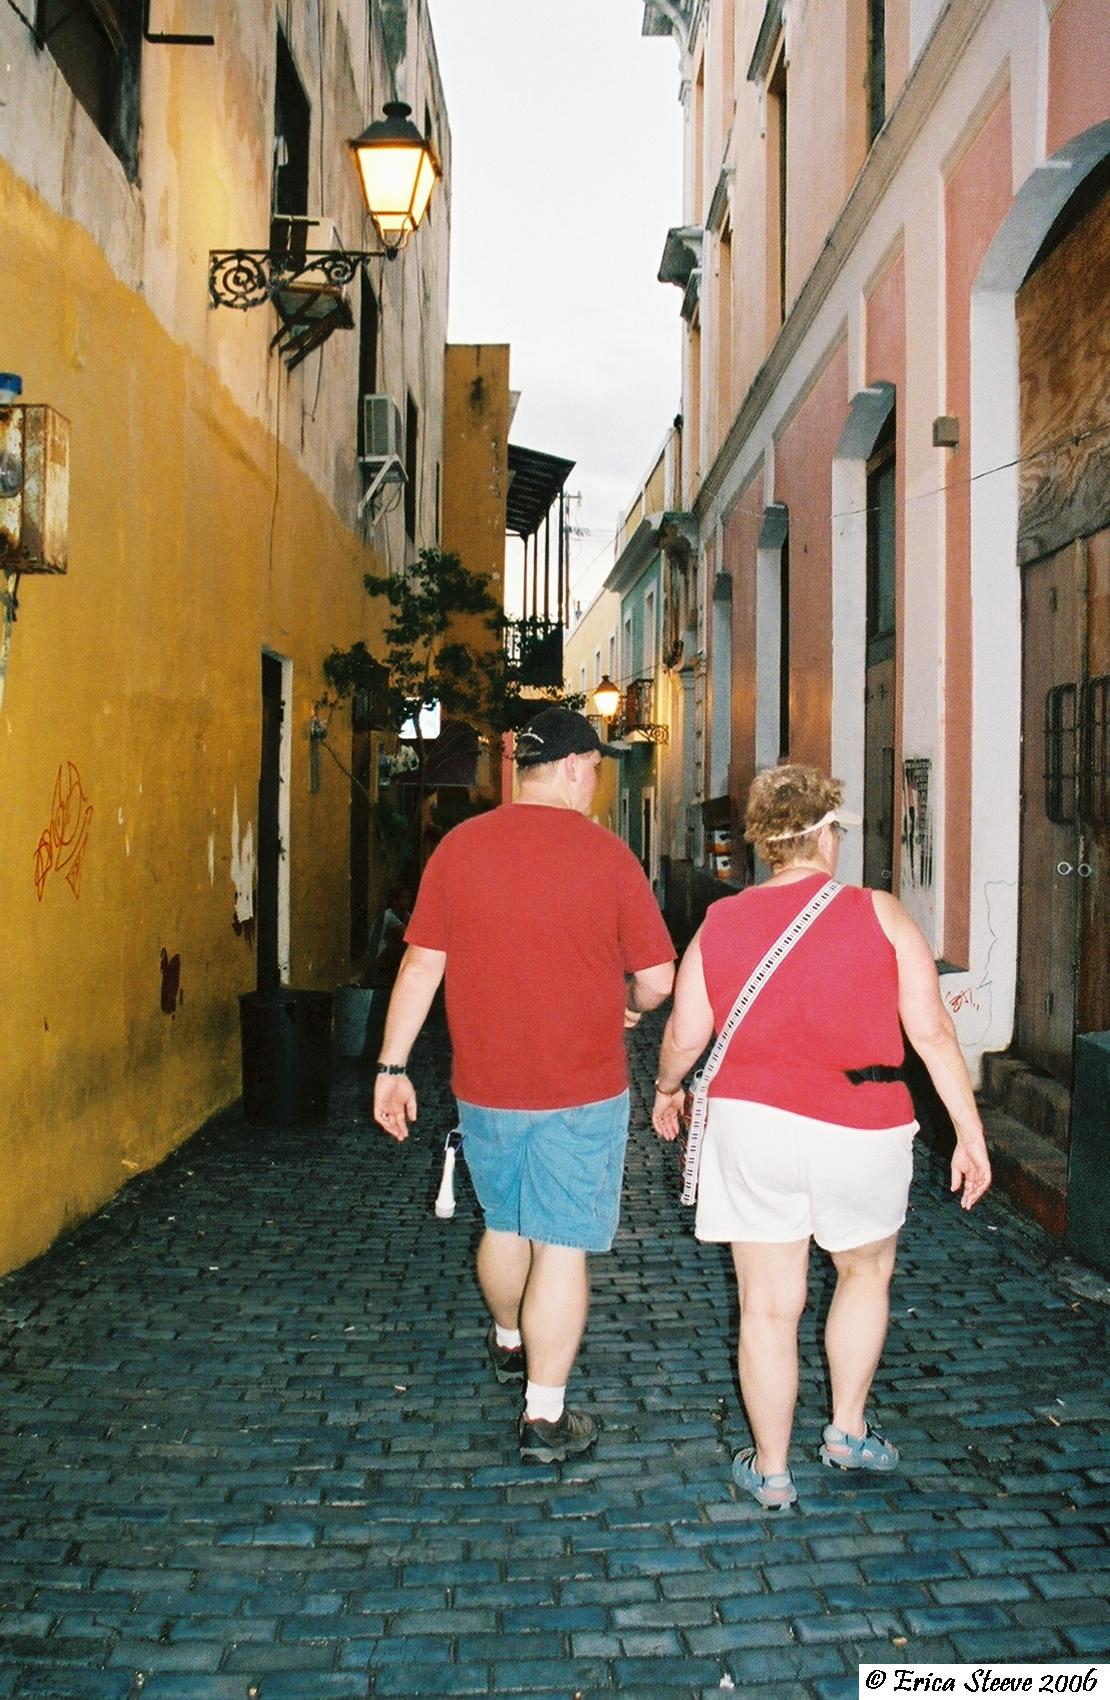 Ed and Sharon walking down an alley in Old San Juan